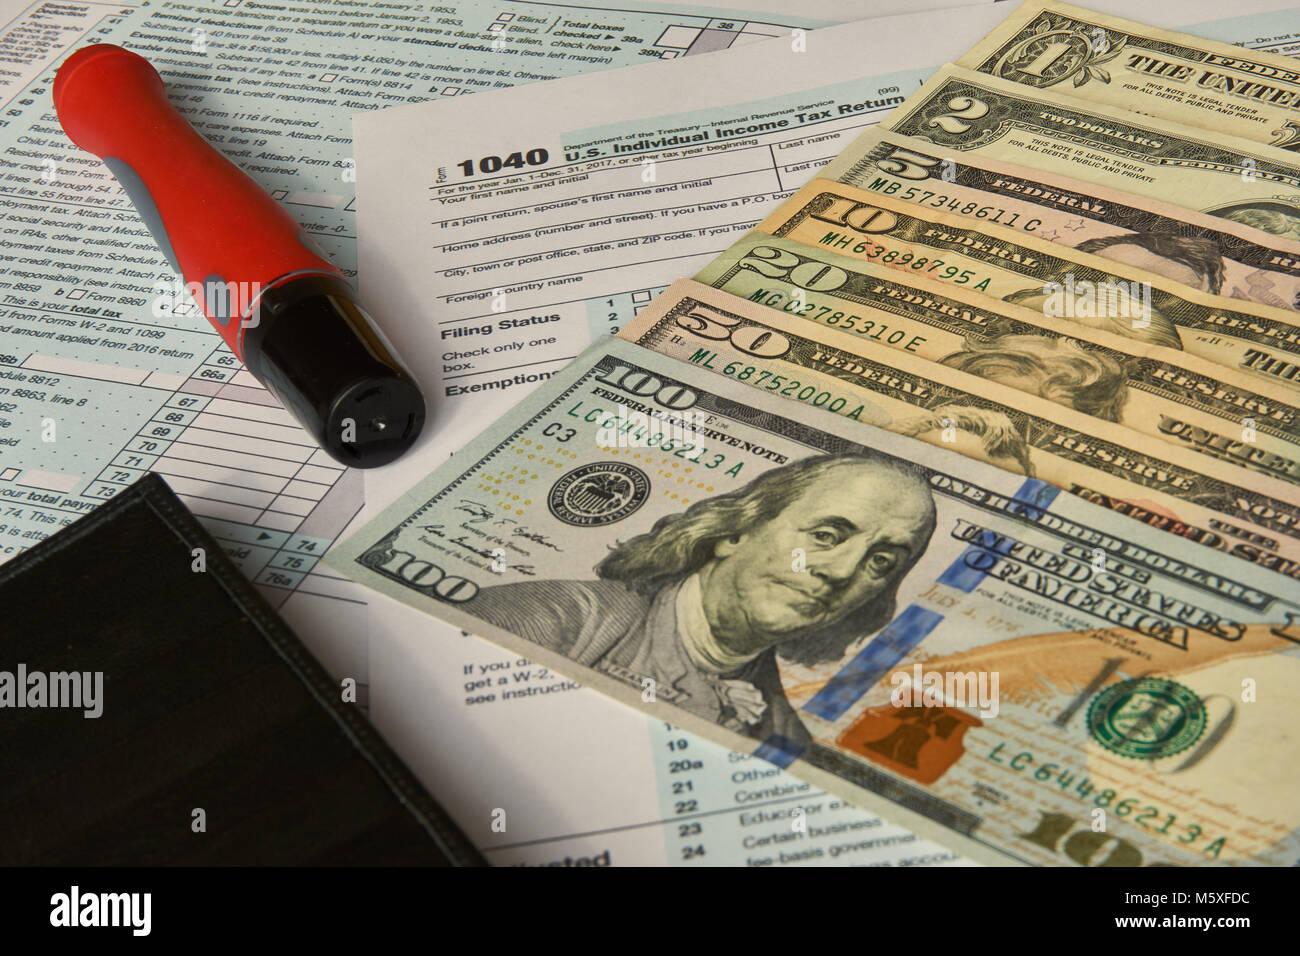 US 1040 Tax Form next to USD Dollars, Pen and Wallet Stock Photo